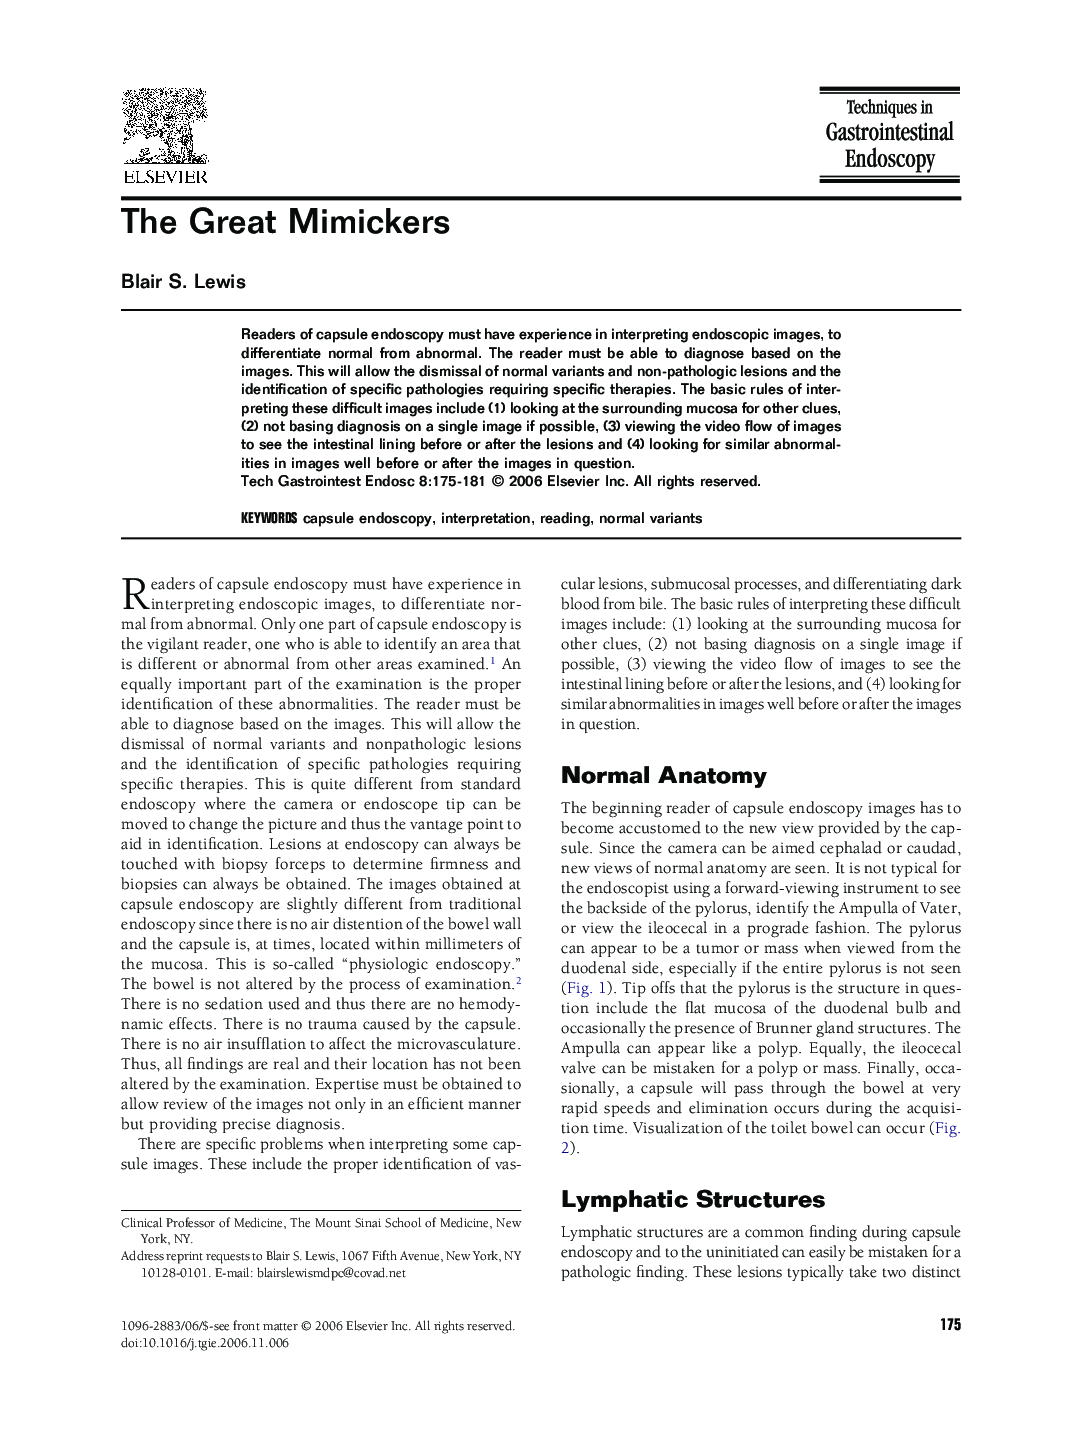 The Great Mimickers